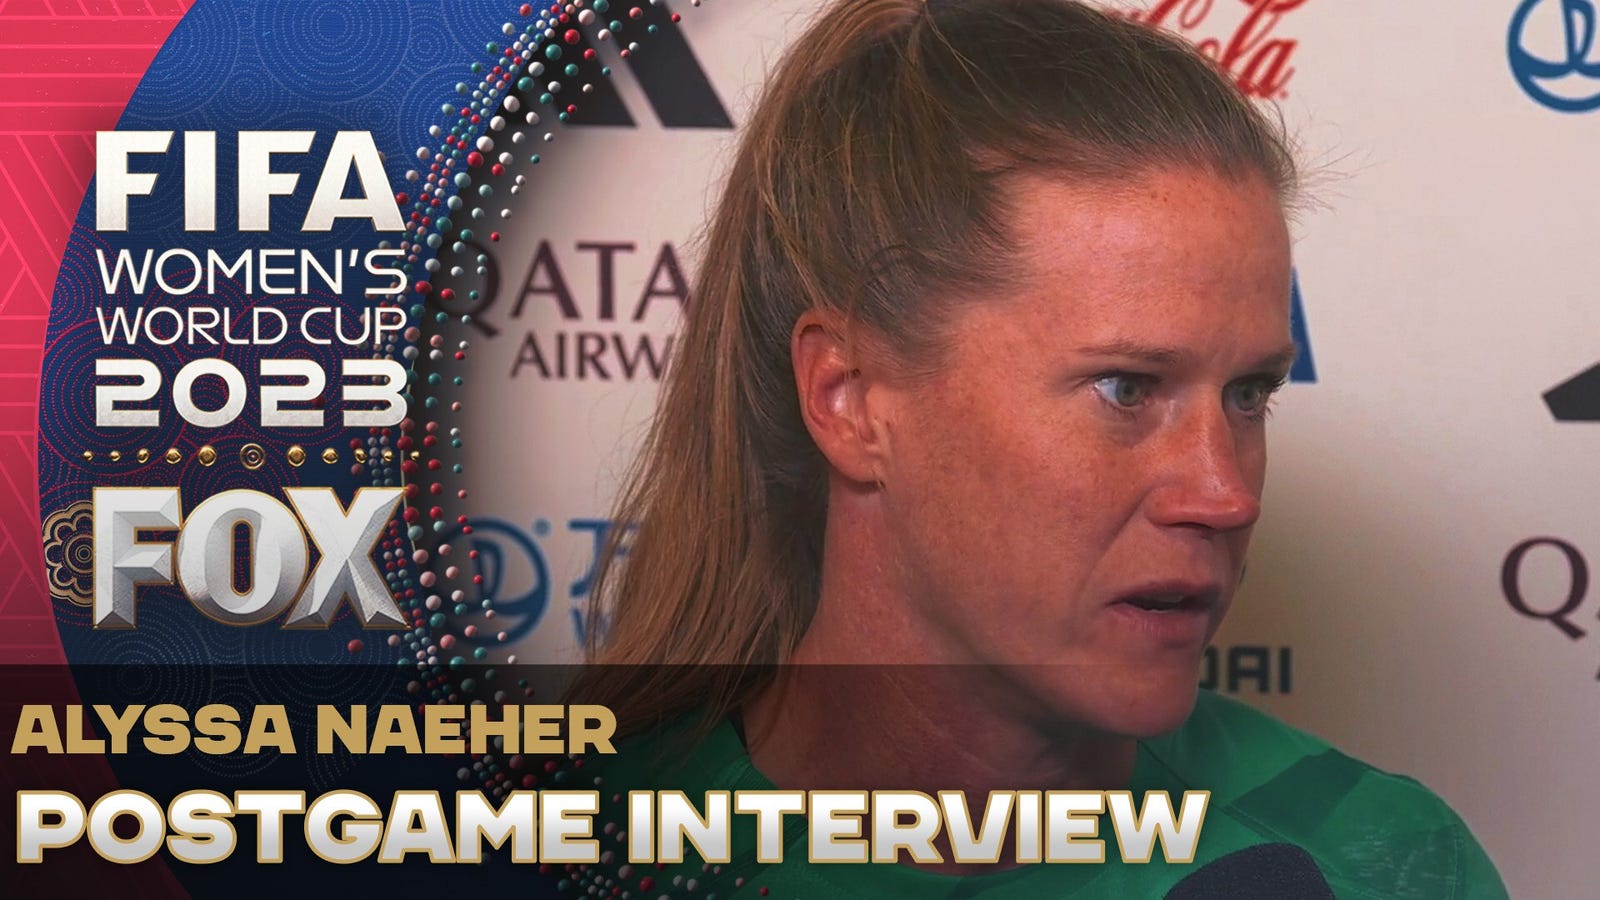 'We just lost the World Cup by a millimeter' - USWNT goalkeeper Alyssa Naeher after United States' elimination